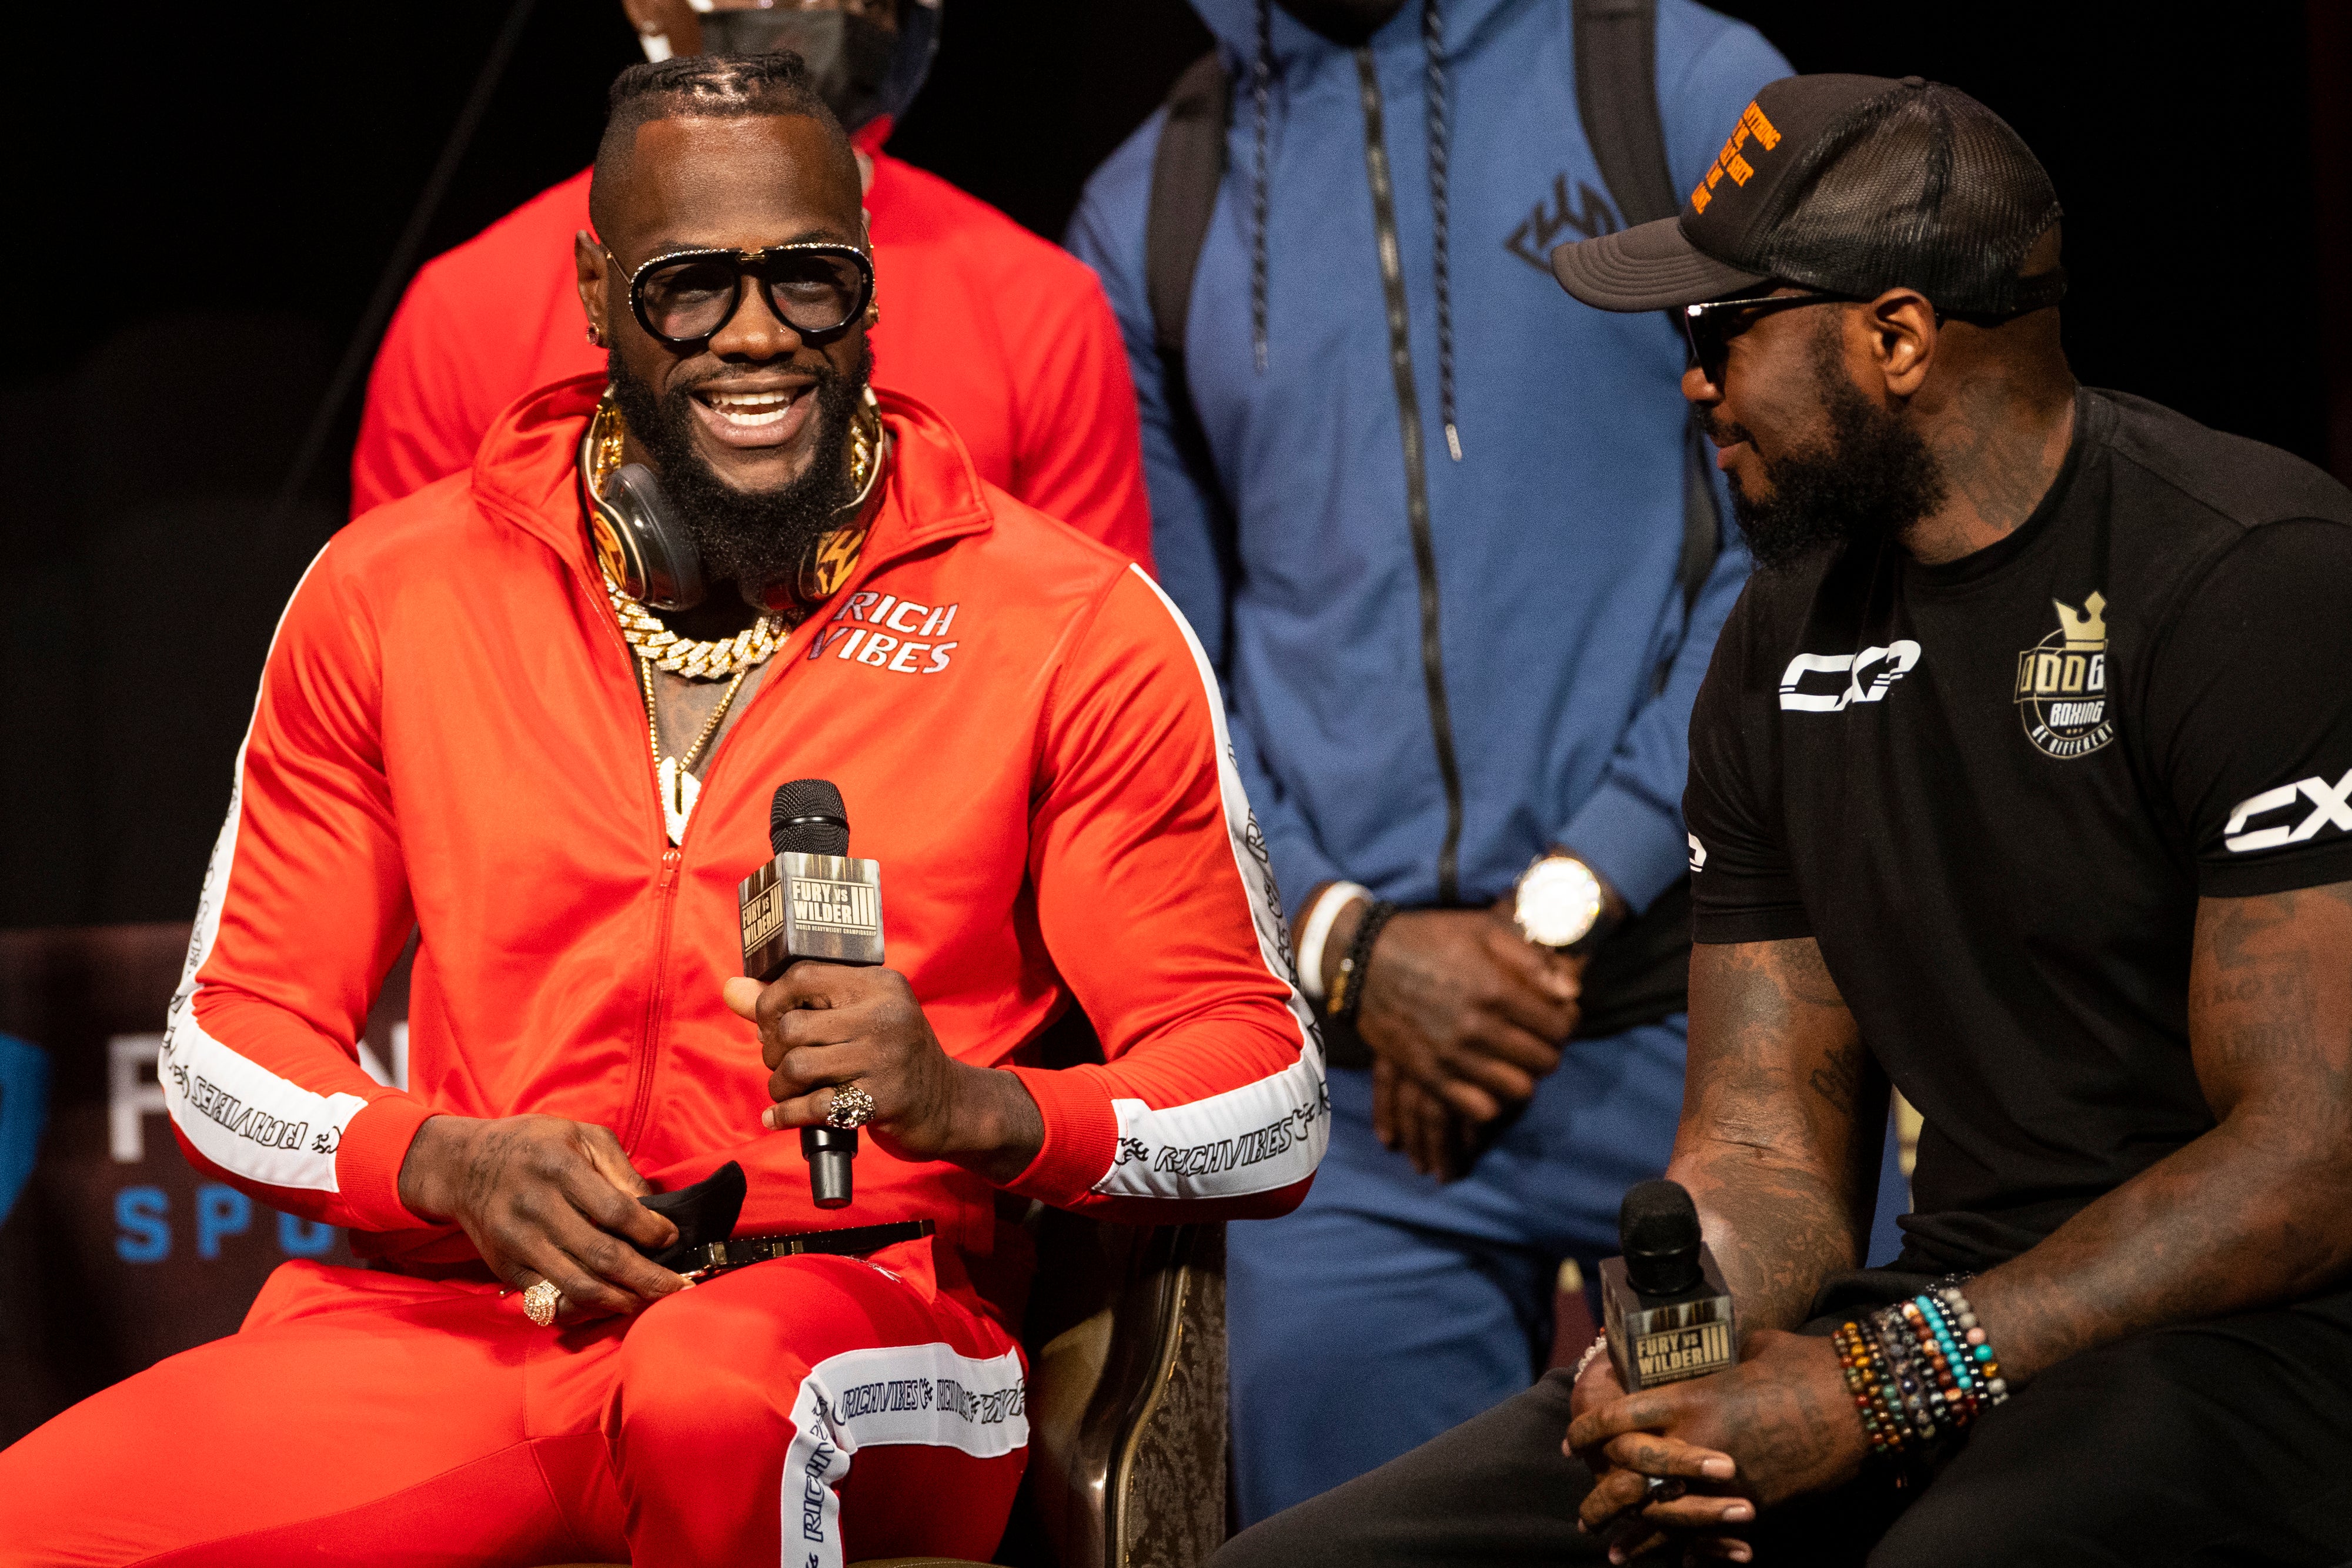 Deontay Wilder is attempting to avenge his defeat in the last fight